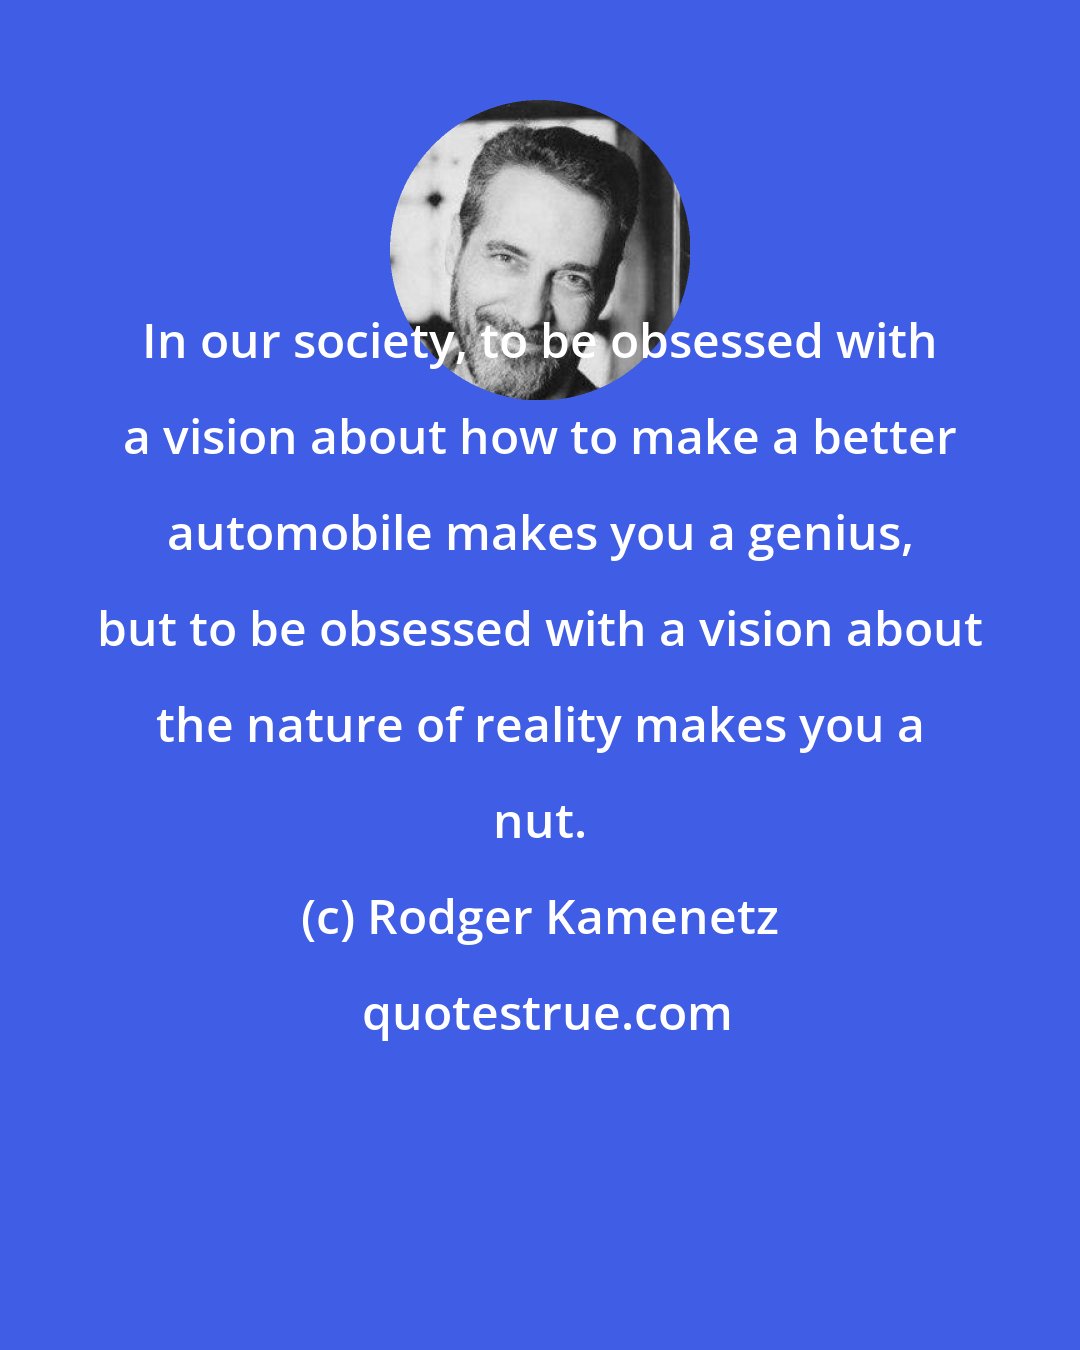 Rodger Kamenetz: In our society, to be obsessed with a vision about how to make a better automobile makes you a genius, but to be obsessed with a vision about the nature of reality makes you a nut.